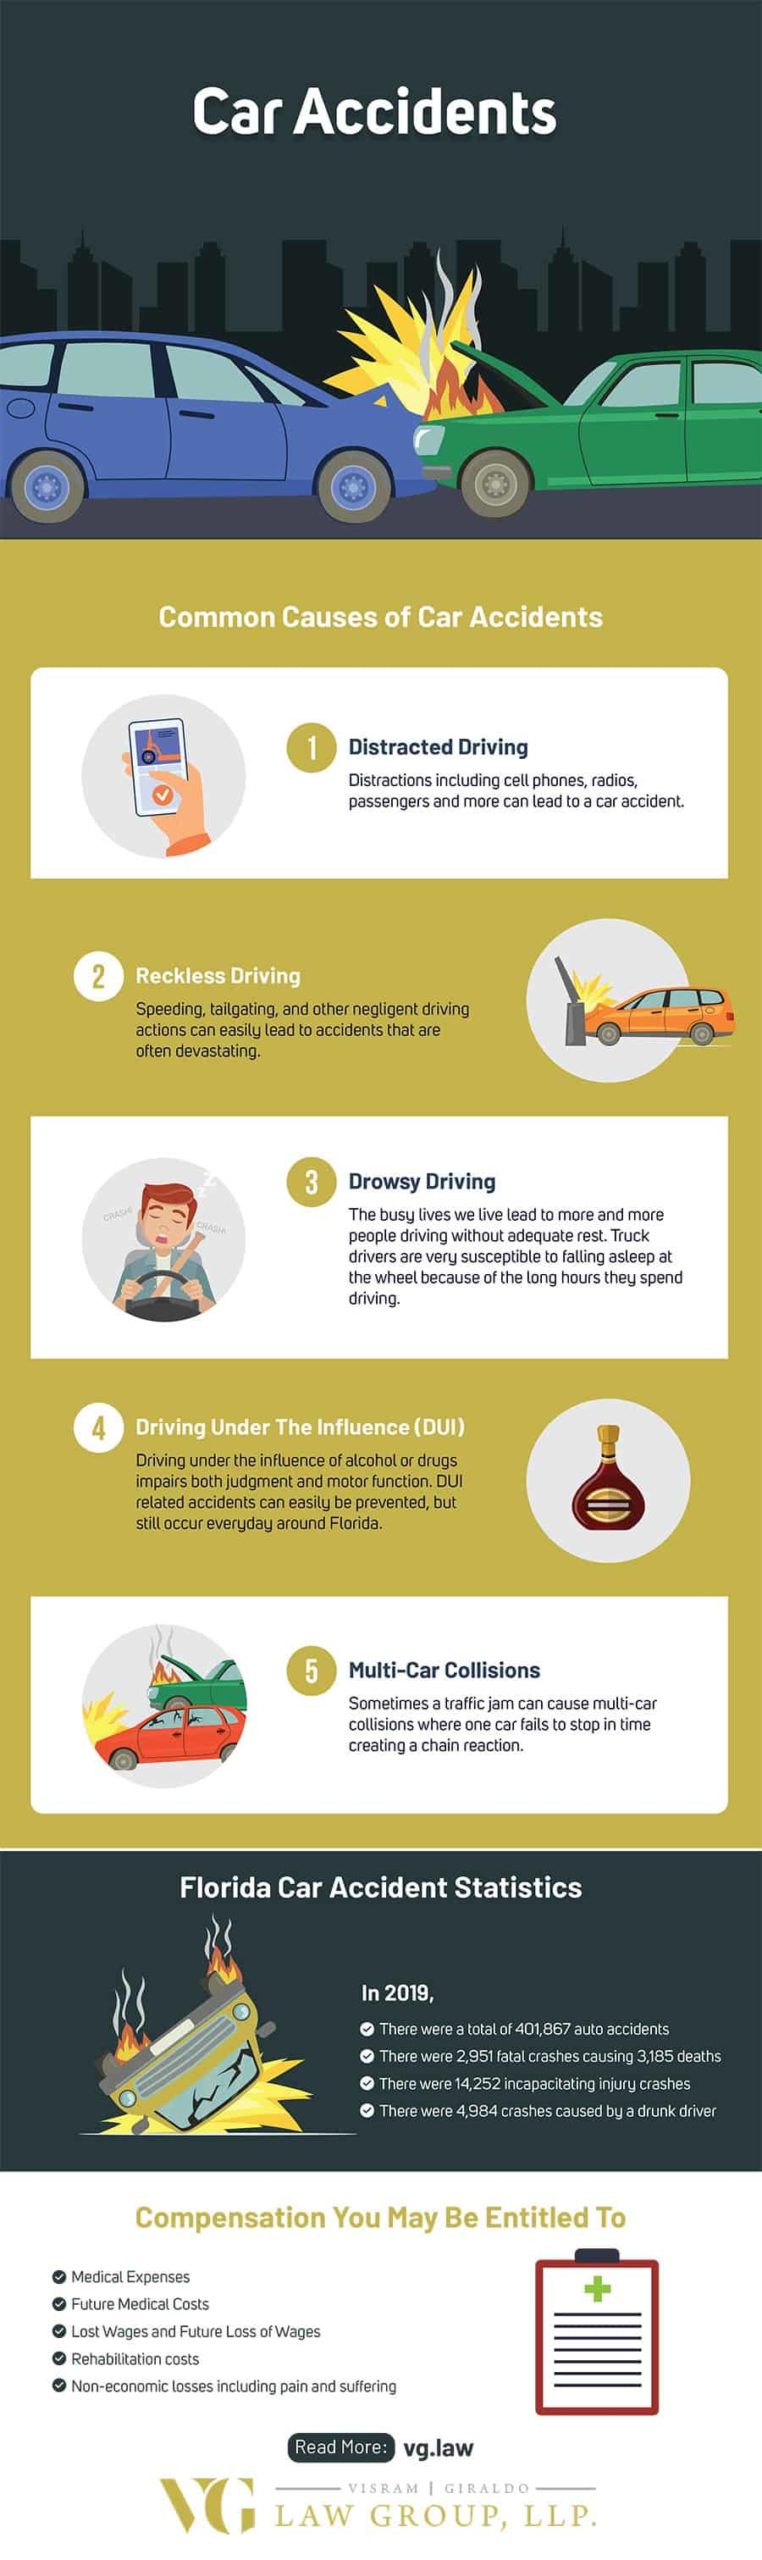 orlando car accident lawyer infographic